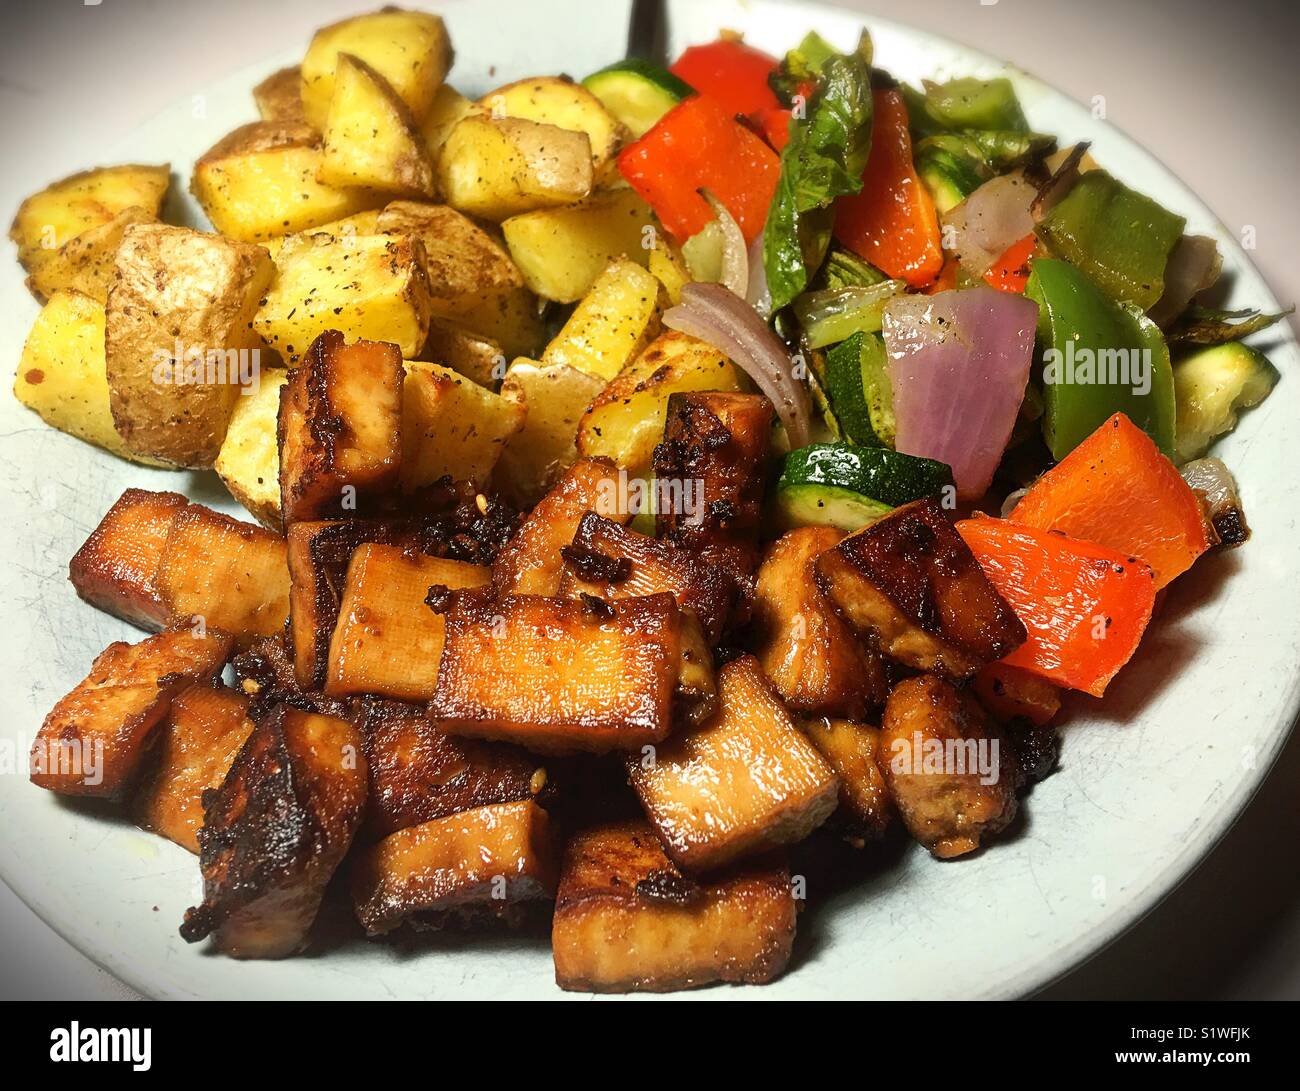 A vegan meal of tofu and grilled vegetables. Stock Photo